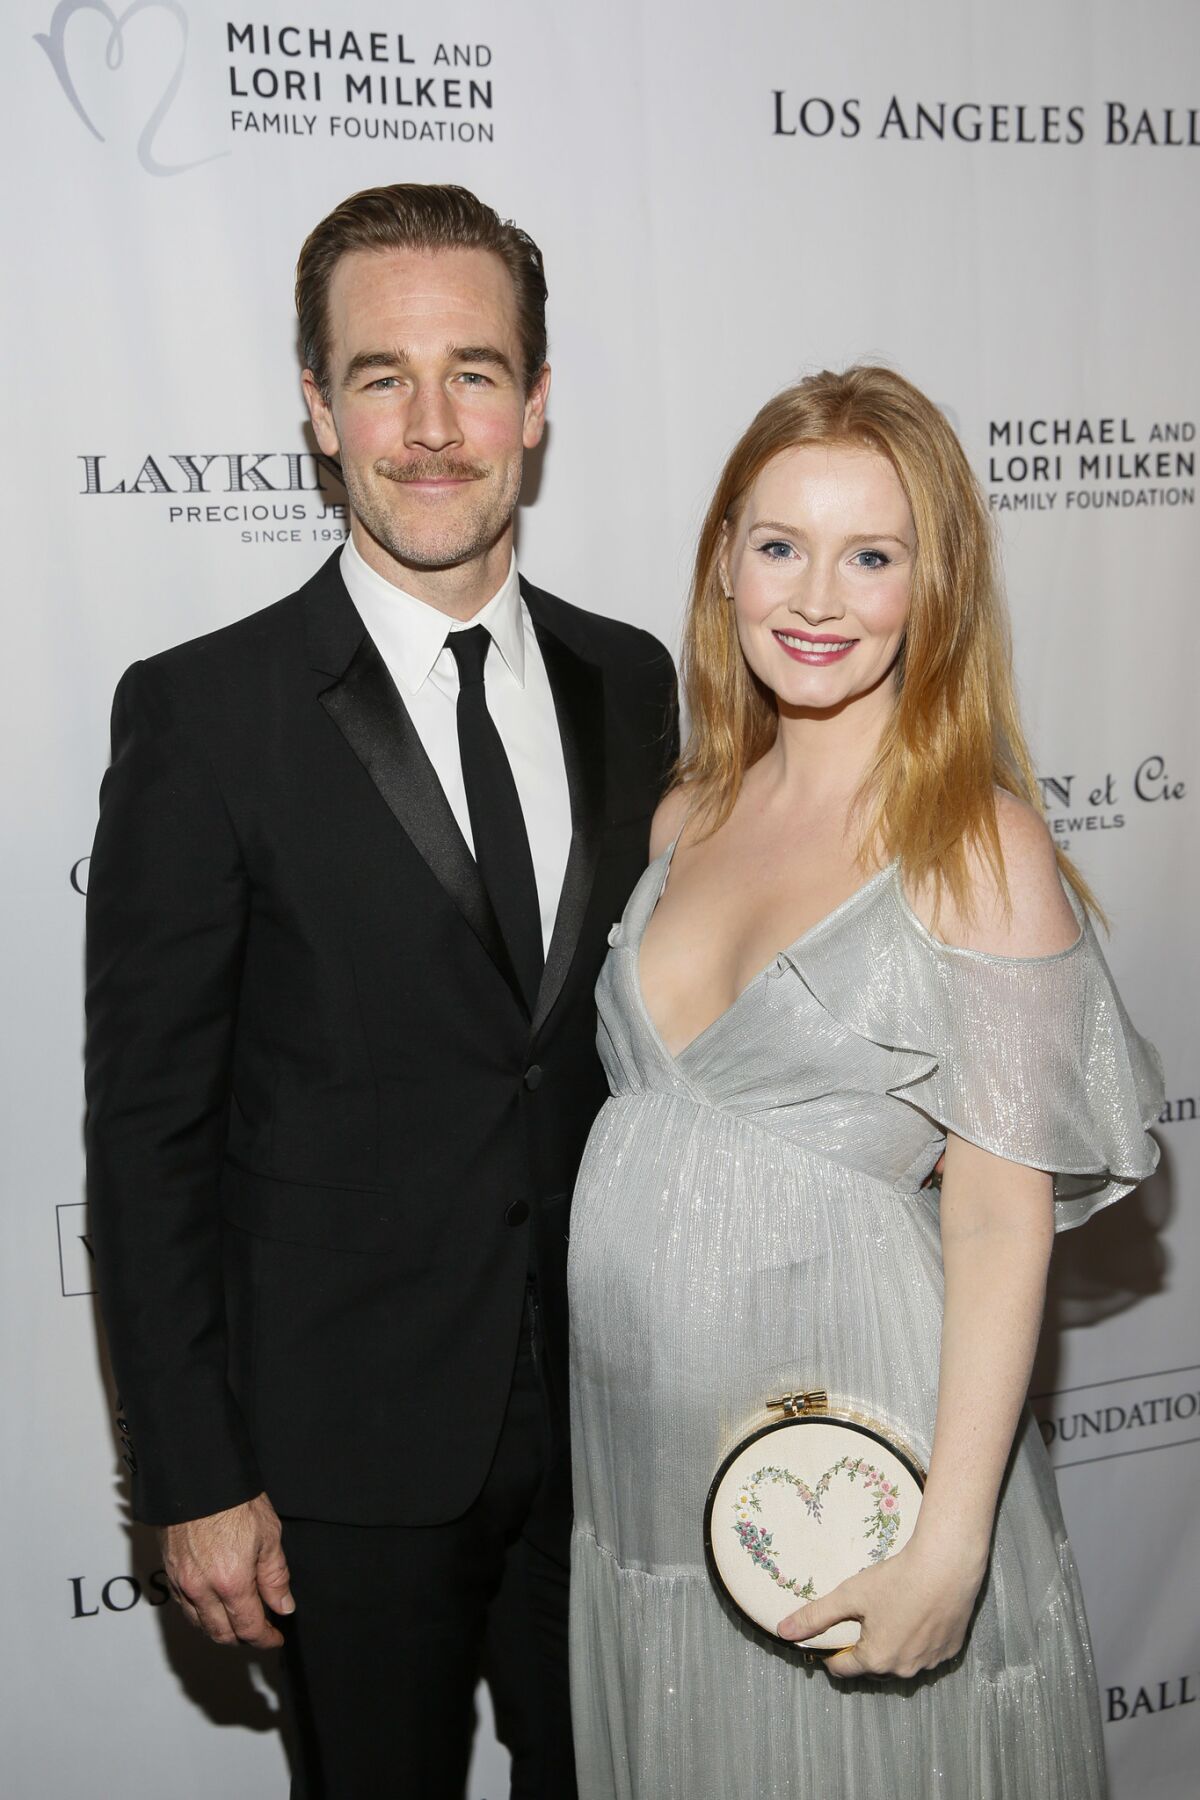 James Van Der Beek and wife Kimberly at the Los Angeles Ballet gala.